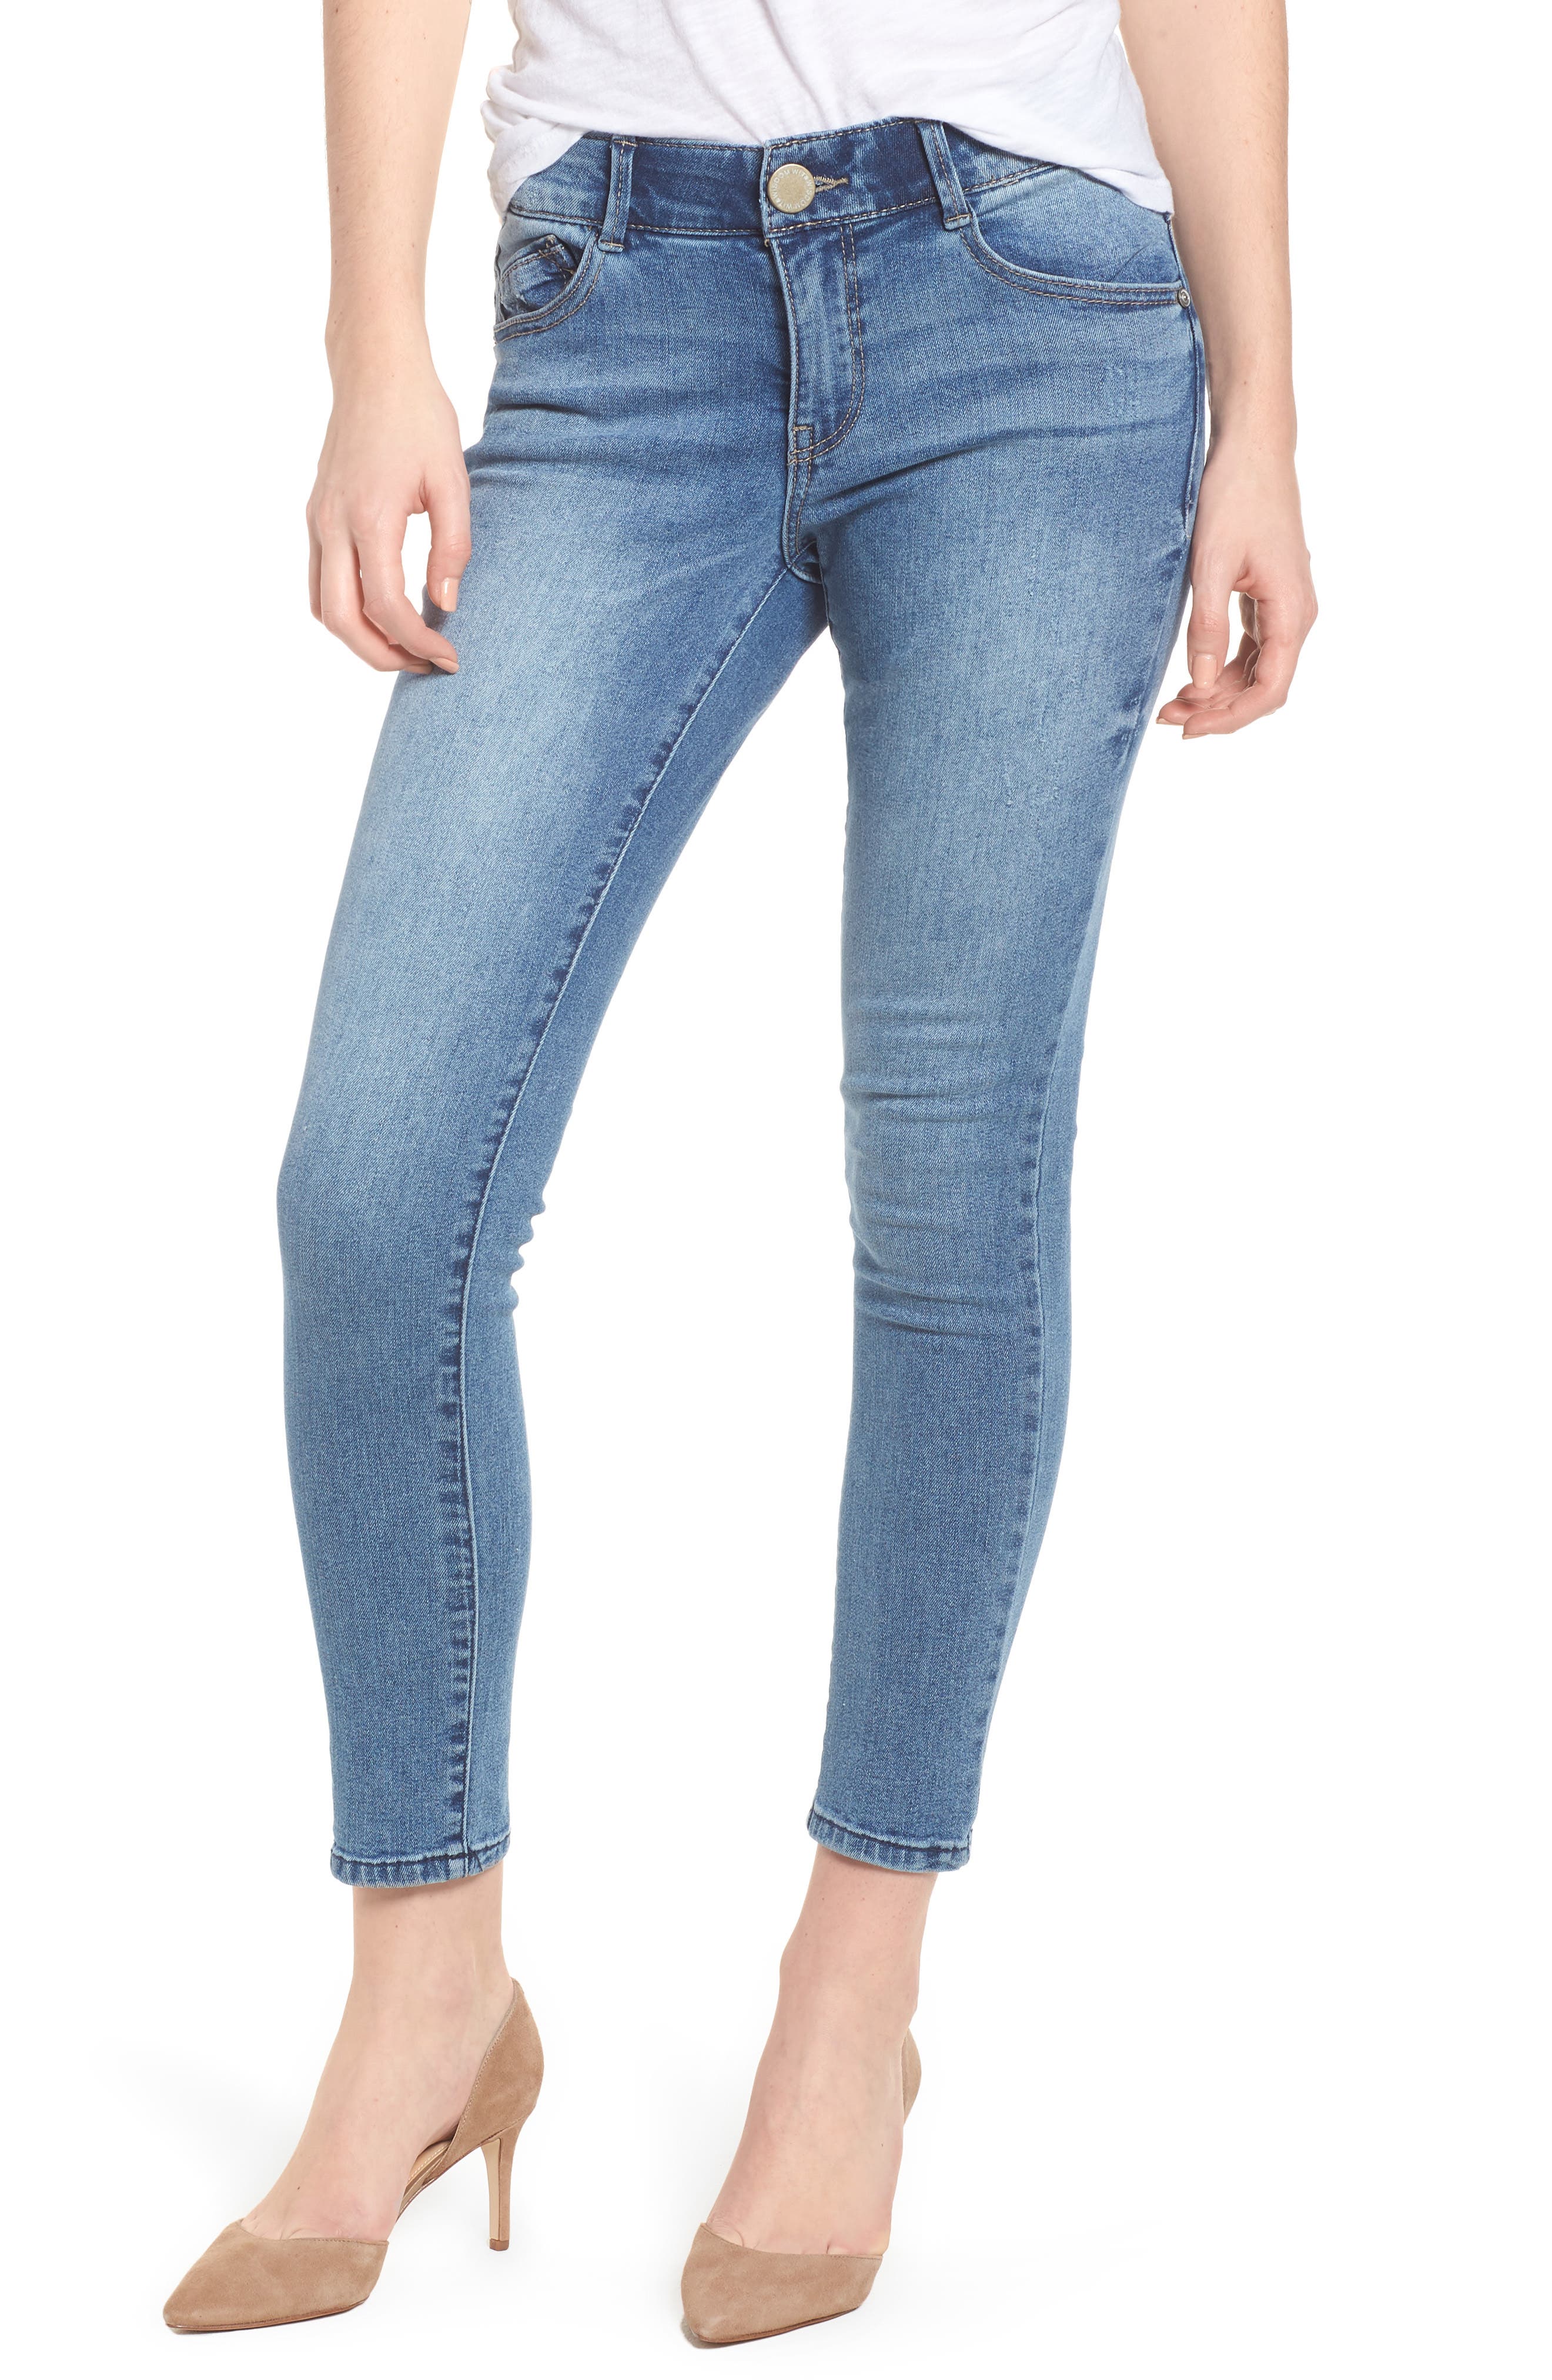 roundhouse jeans